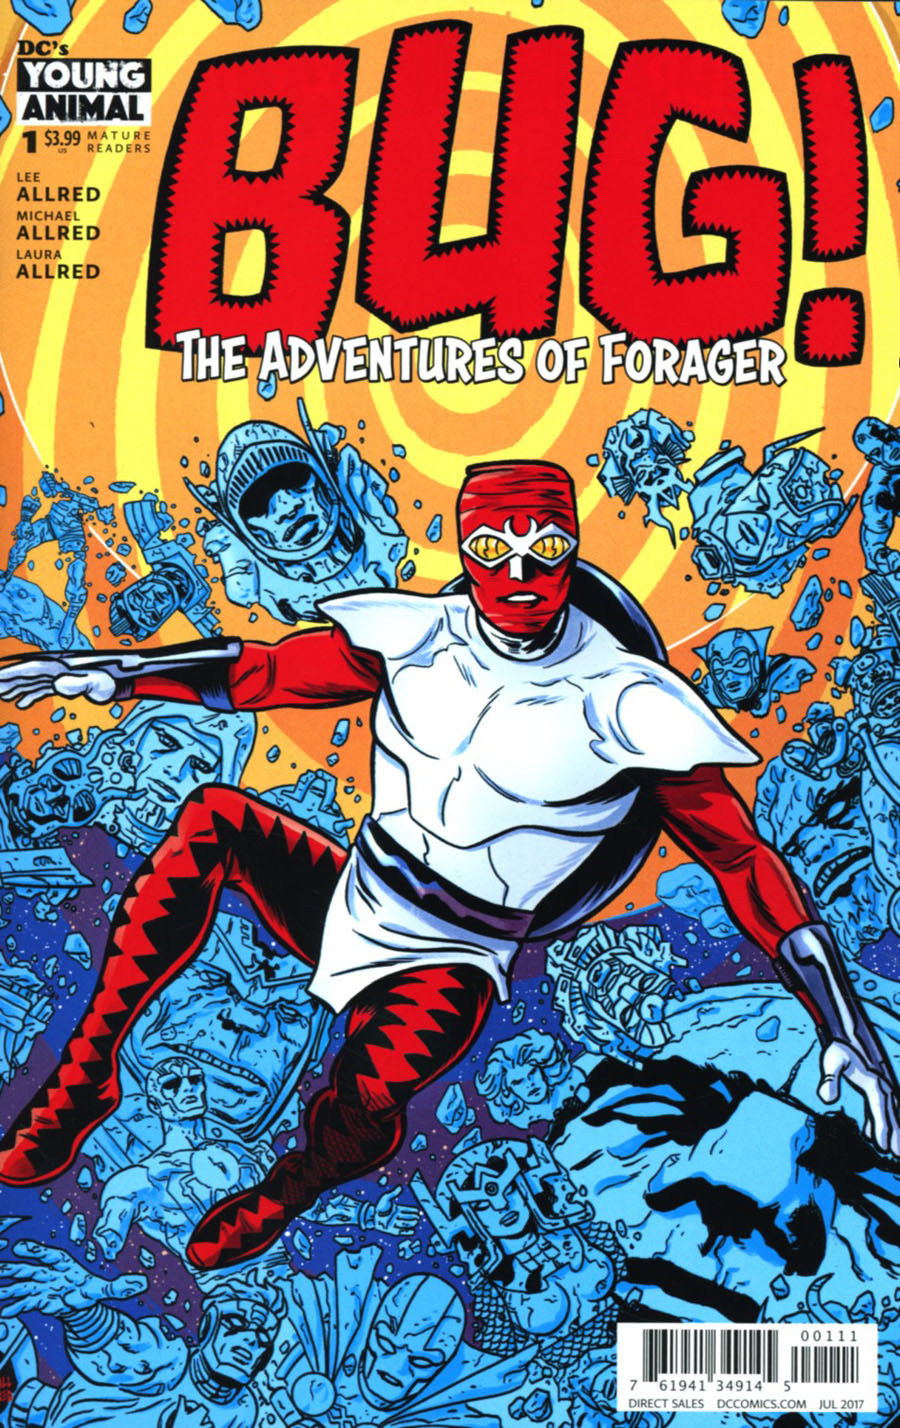 Bug The Adventures Of Forager #1 Cover A Regular Michael Allred Cover